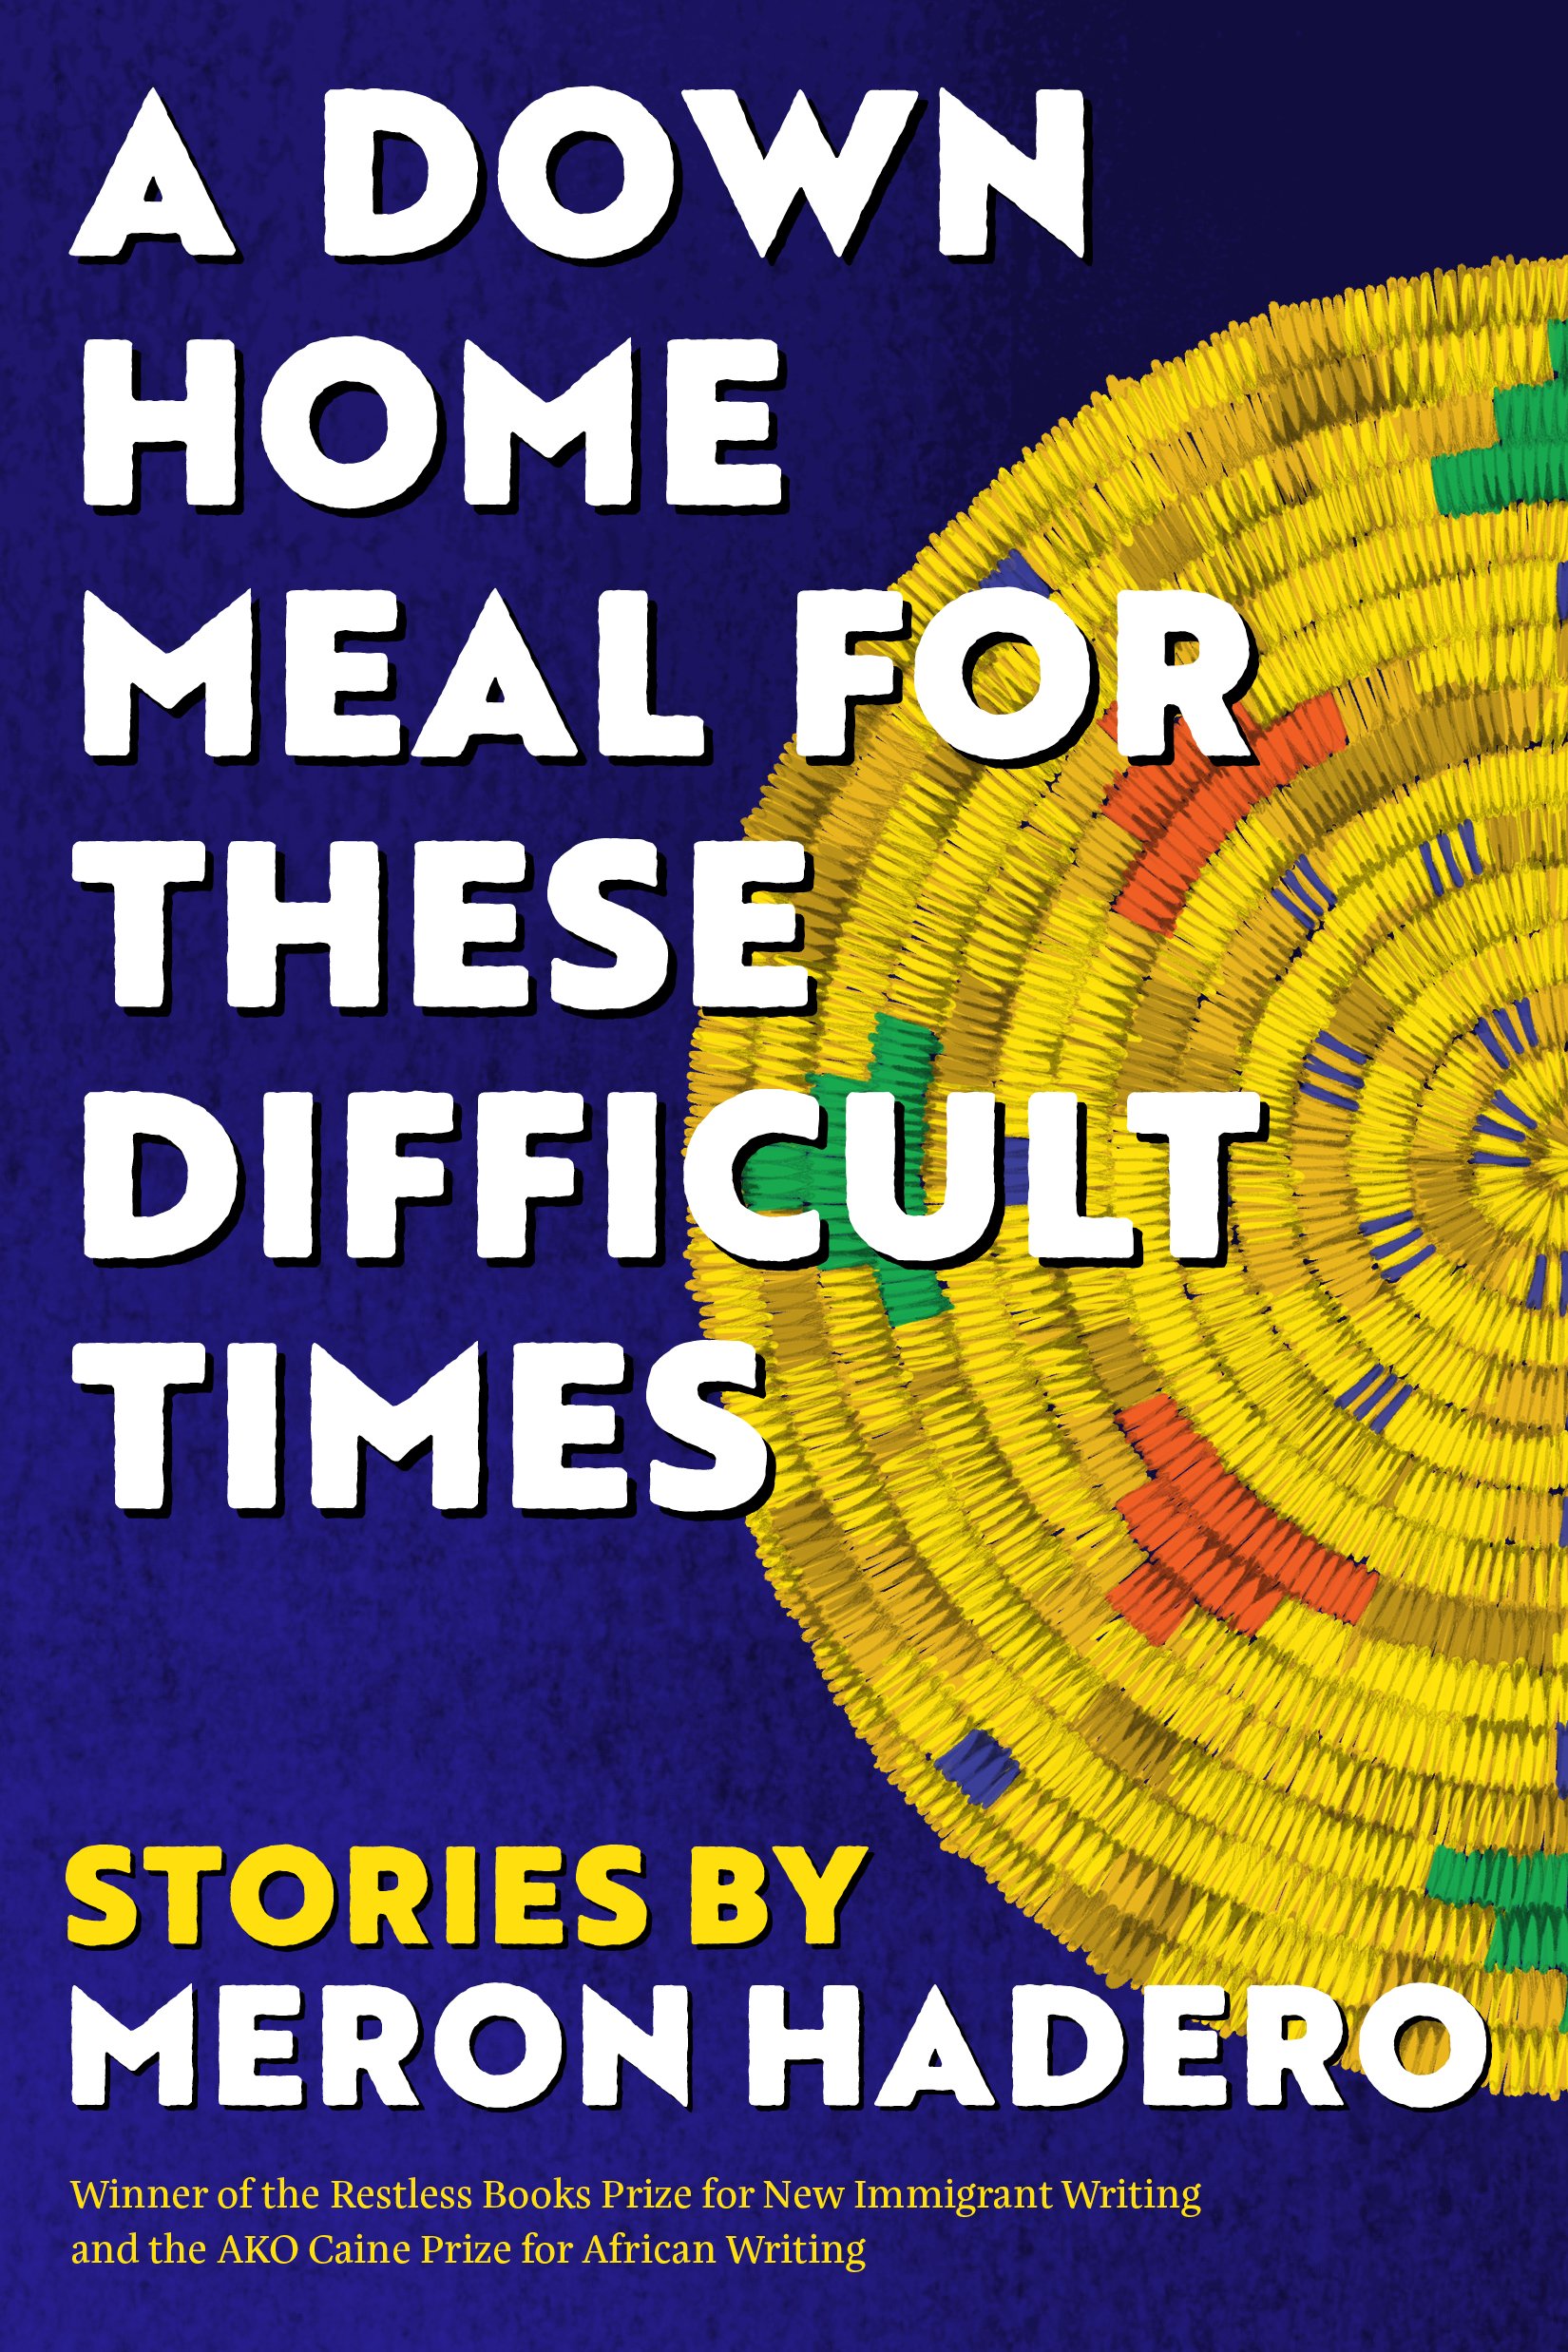 A Down Home Meal for These Difficult Times — Restless Books